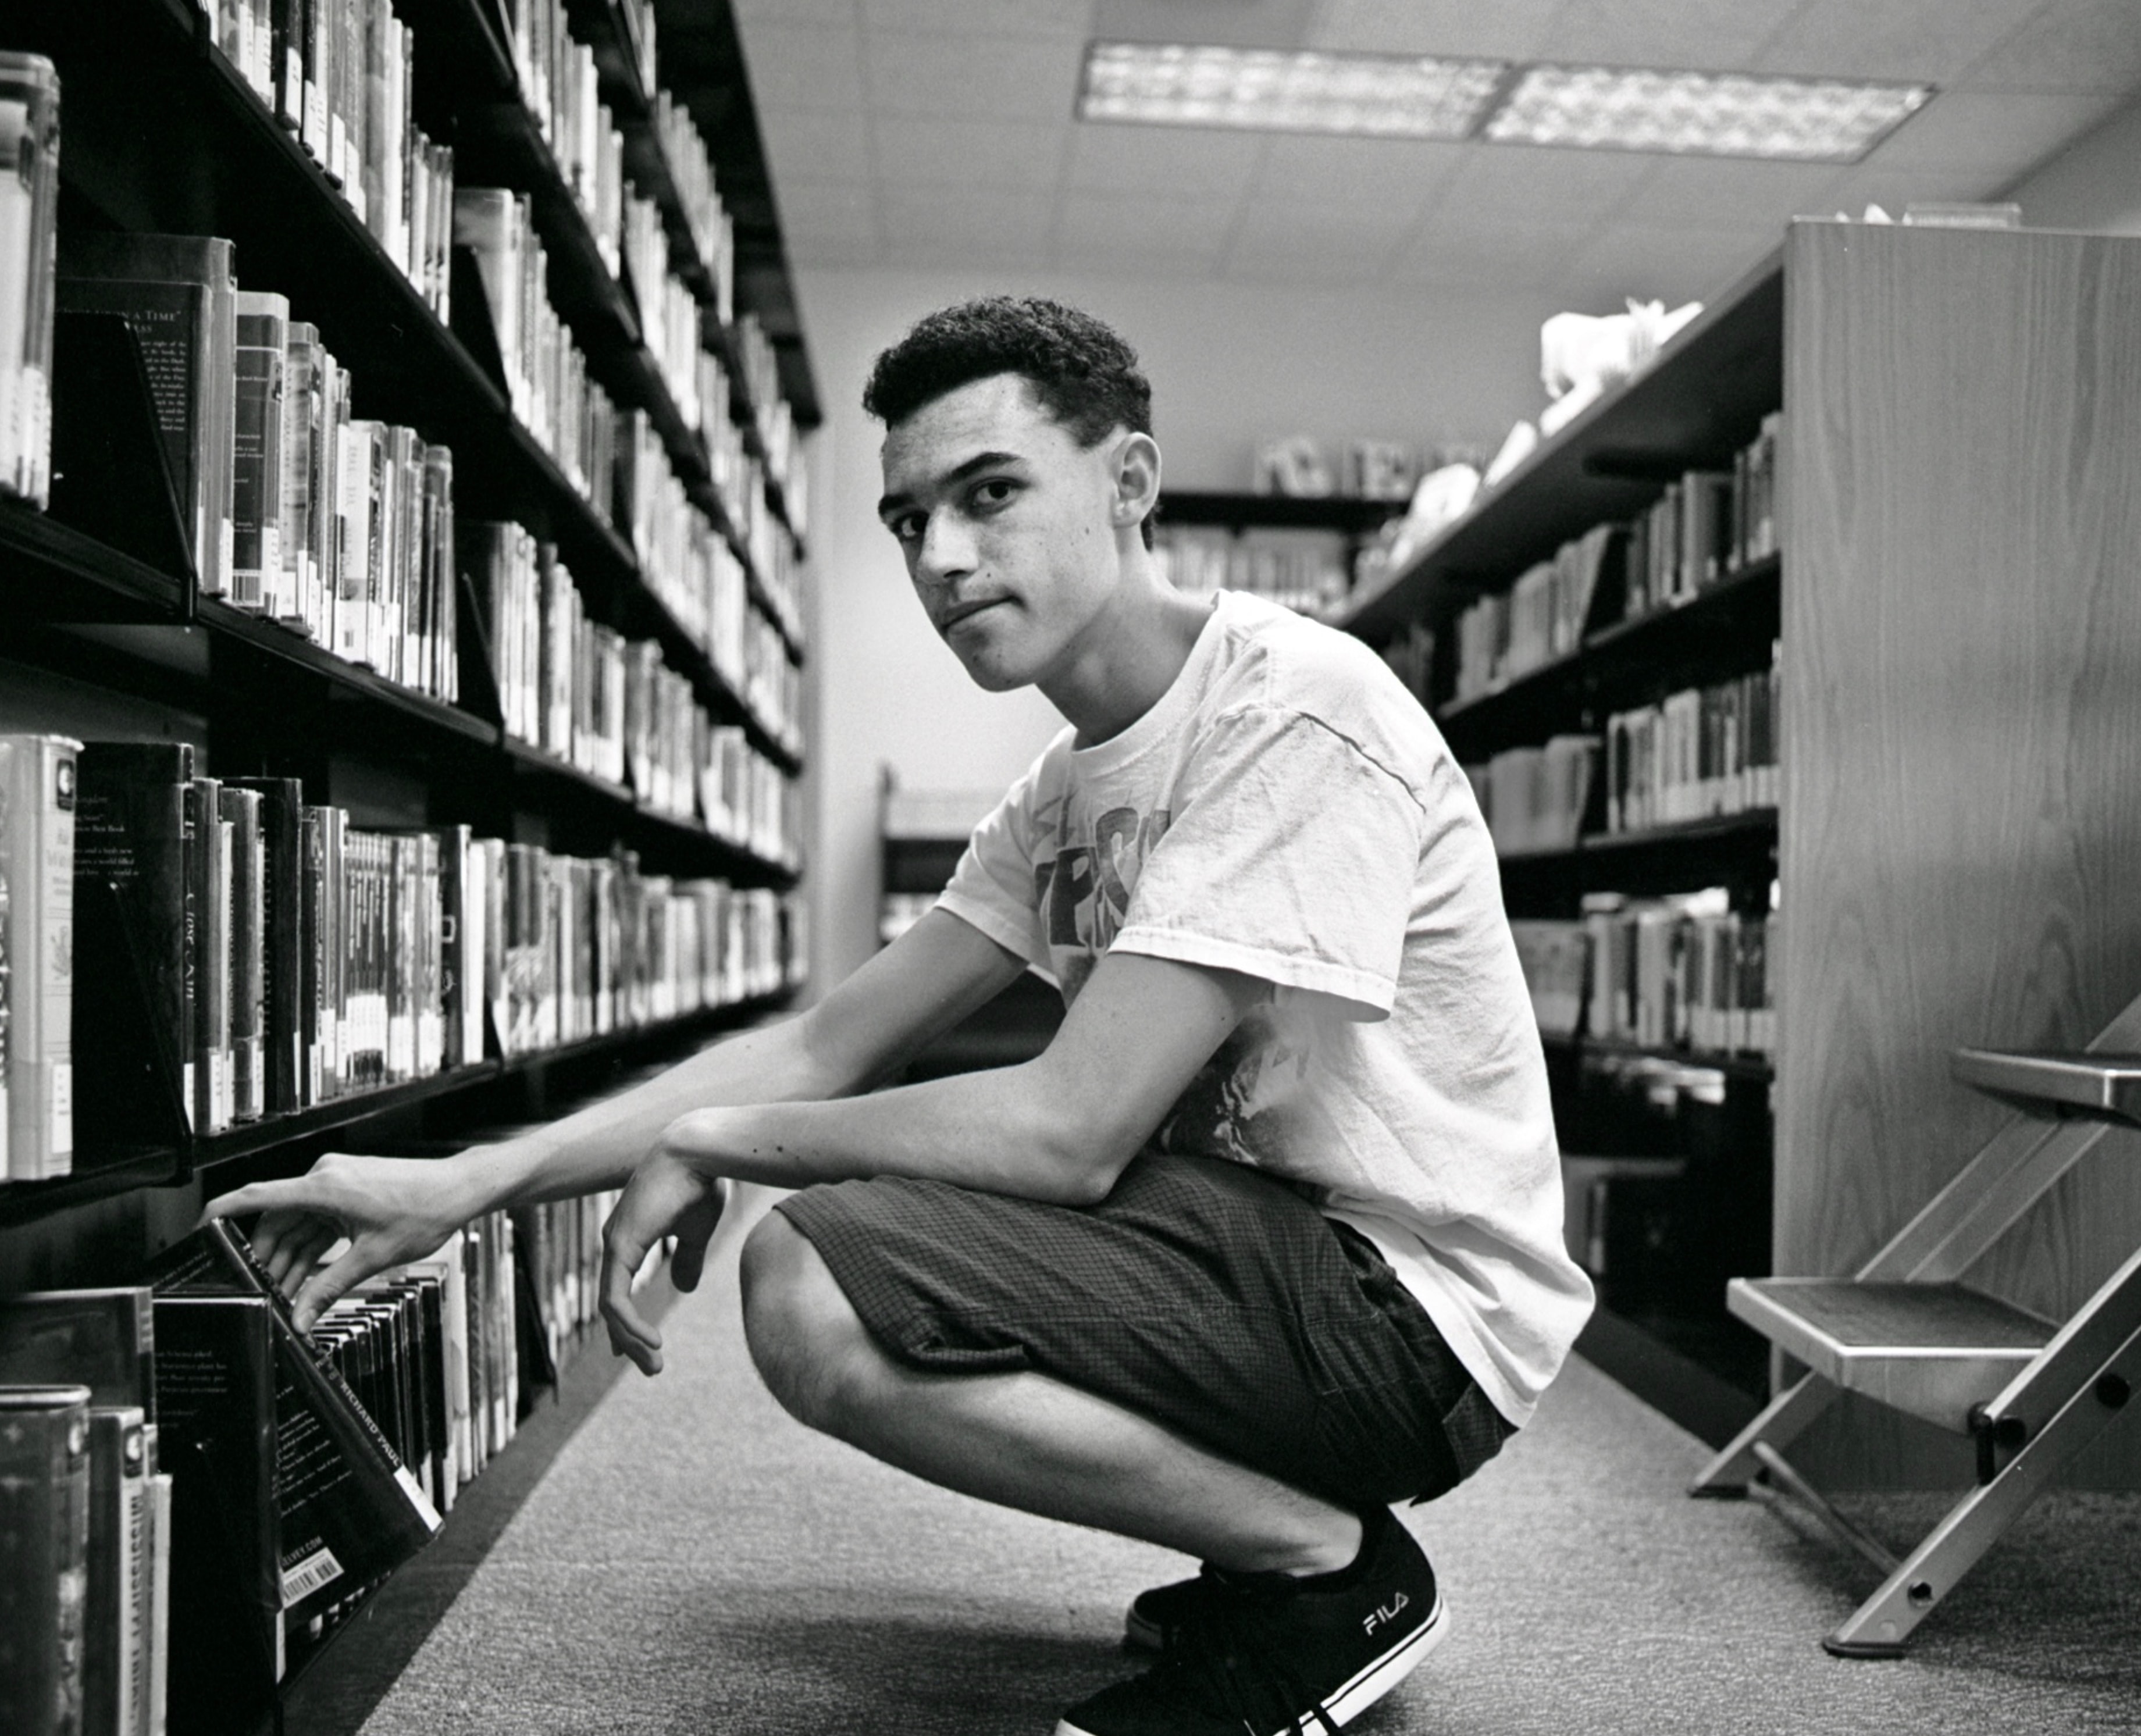 Young men at a library